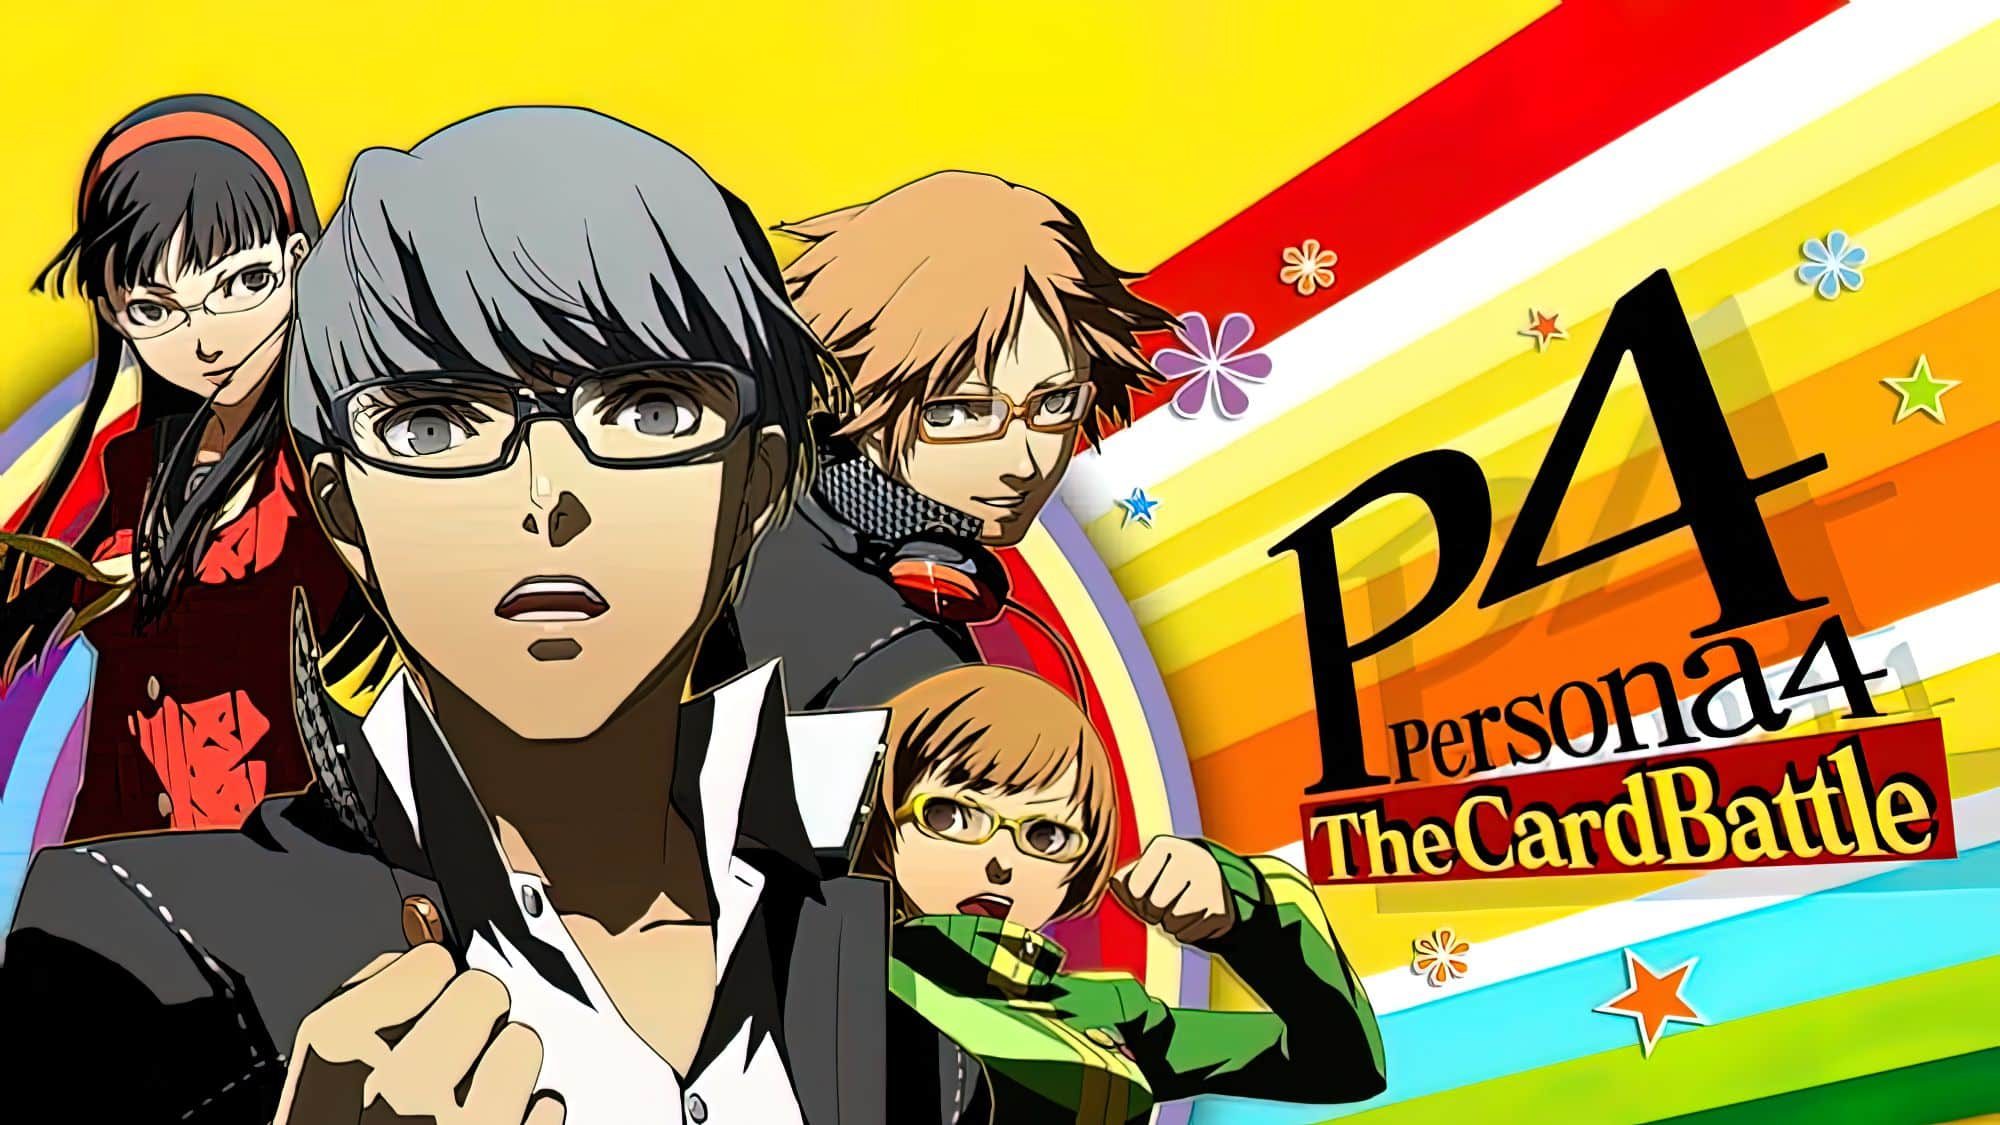 persona-4-the-card-battle-game-picture-4619432